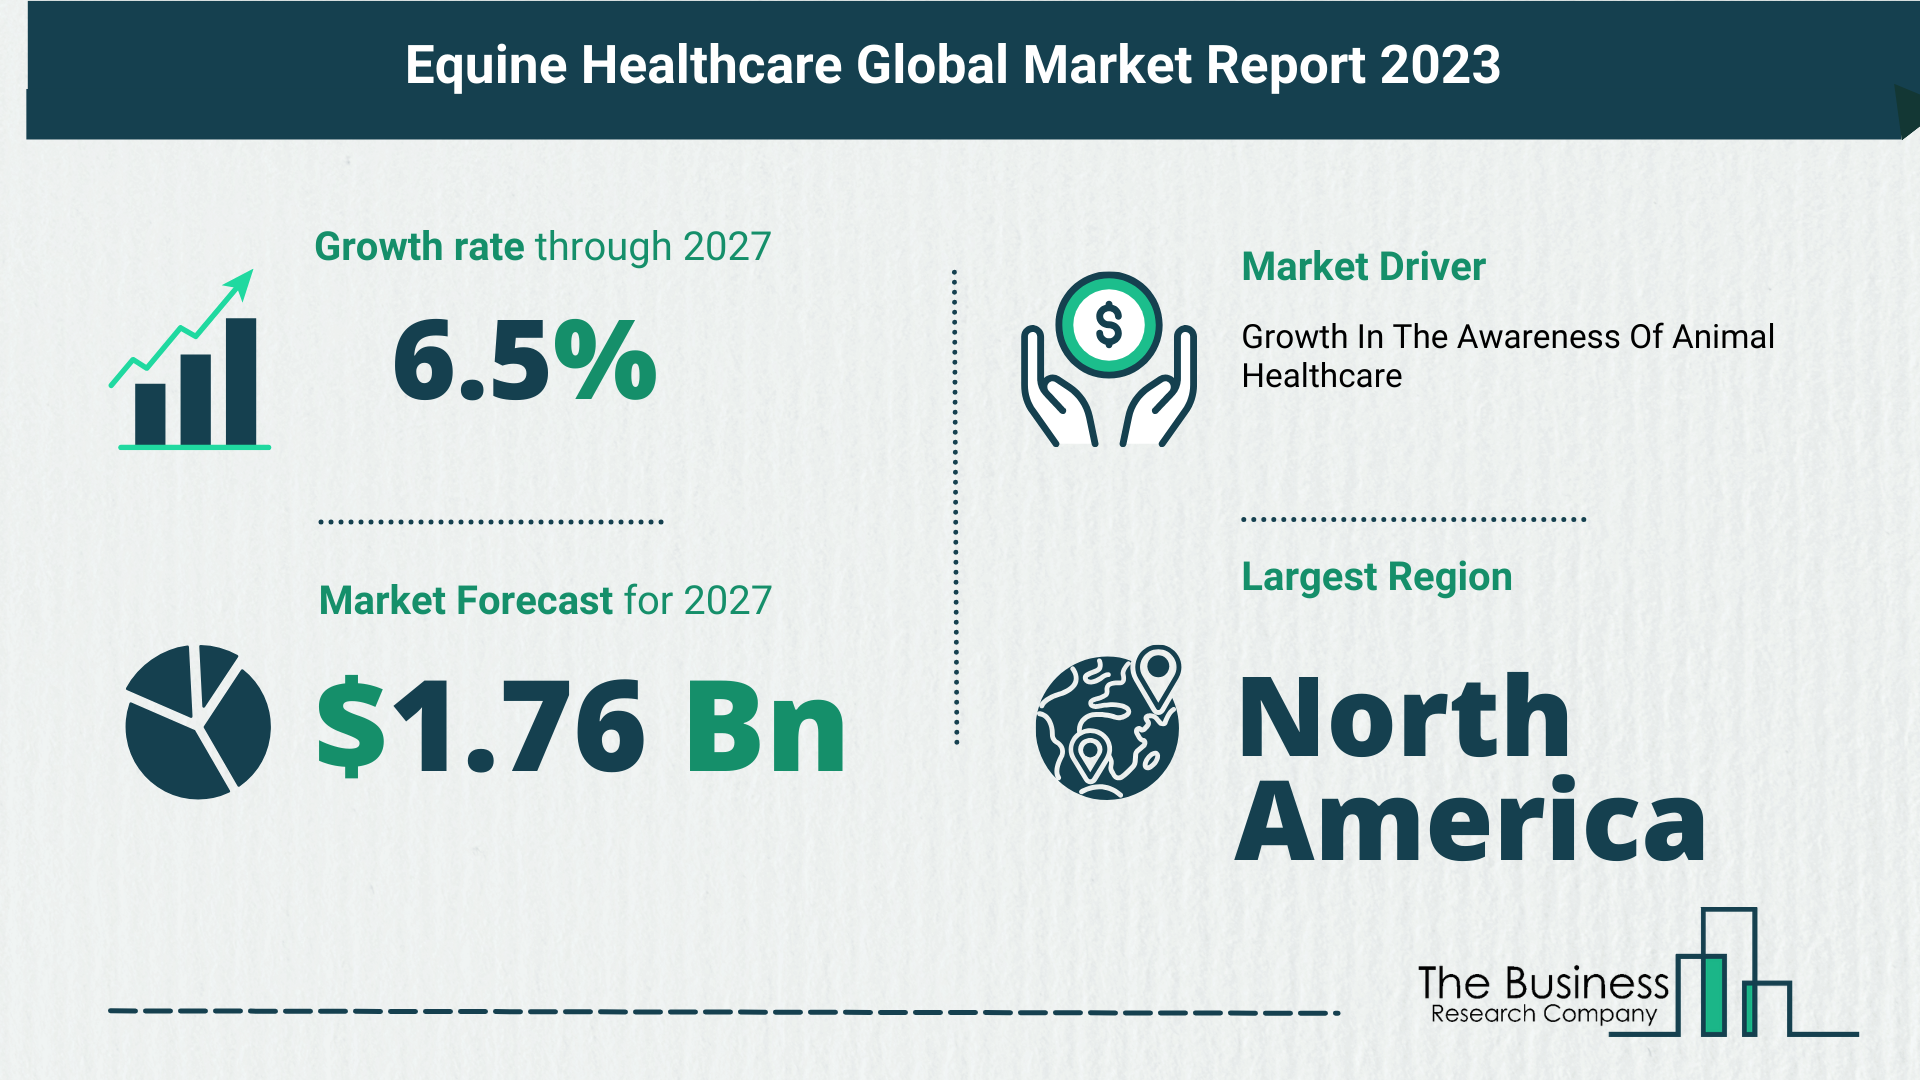 Top 5 Insights From The Equine Healthcare Market Report 2023